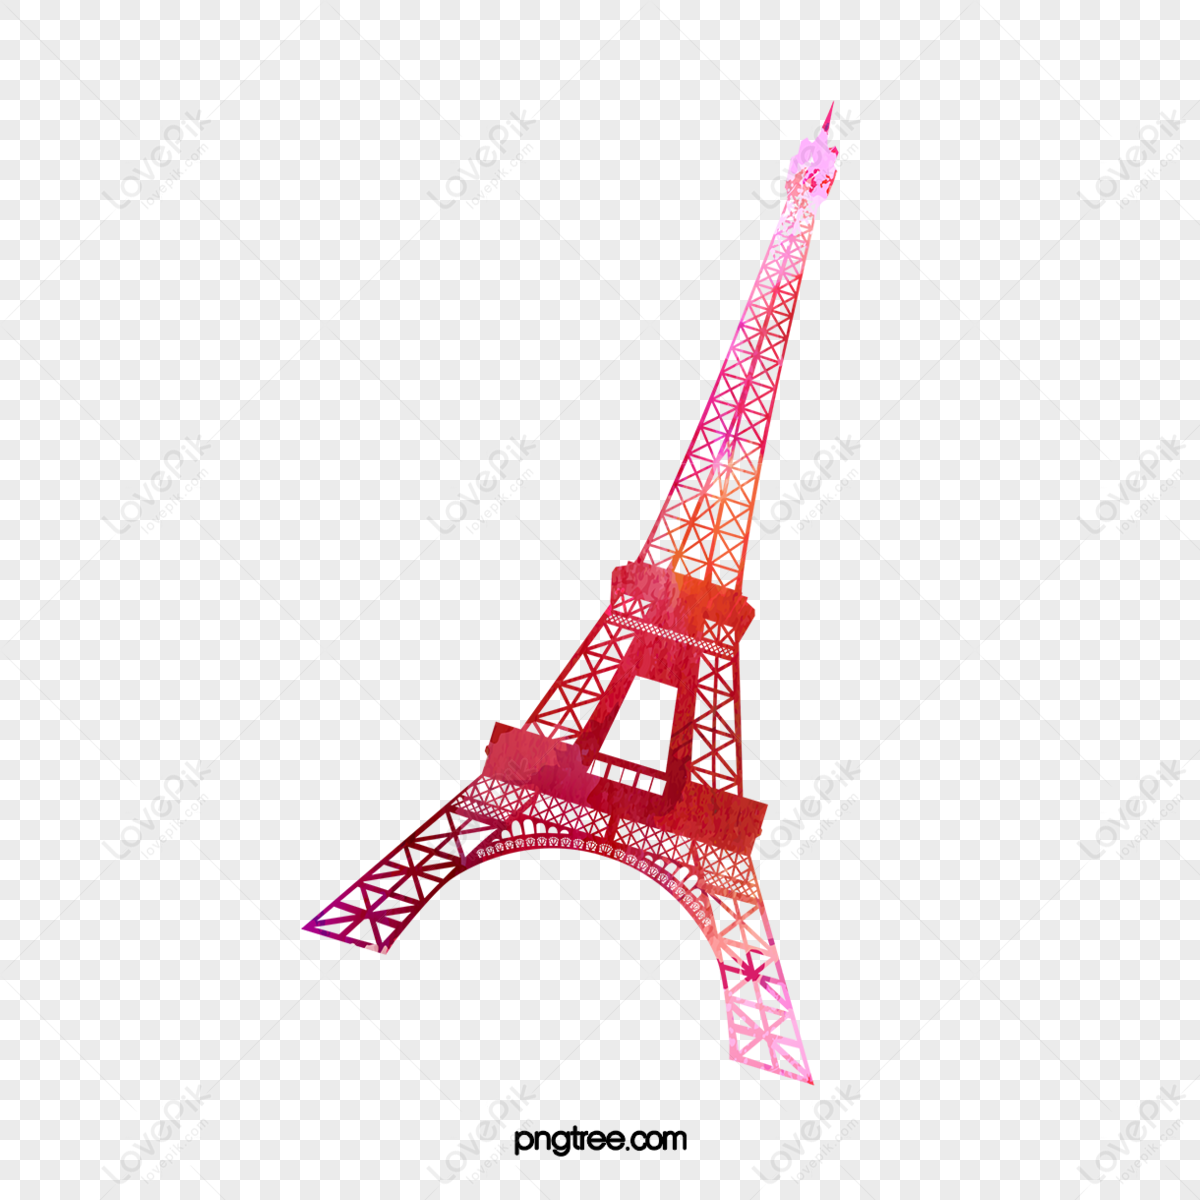 Cartoon delicate hand drawn eiffel tower gradient glossy illustration,outline,cartoon illustrations png free download